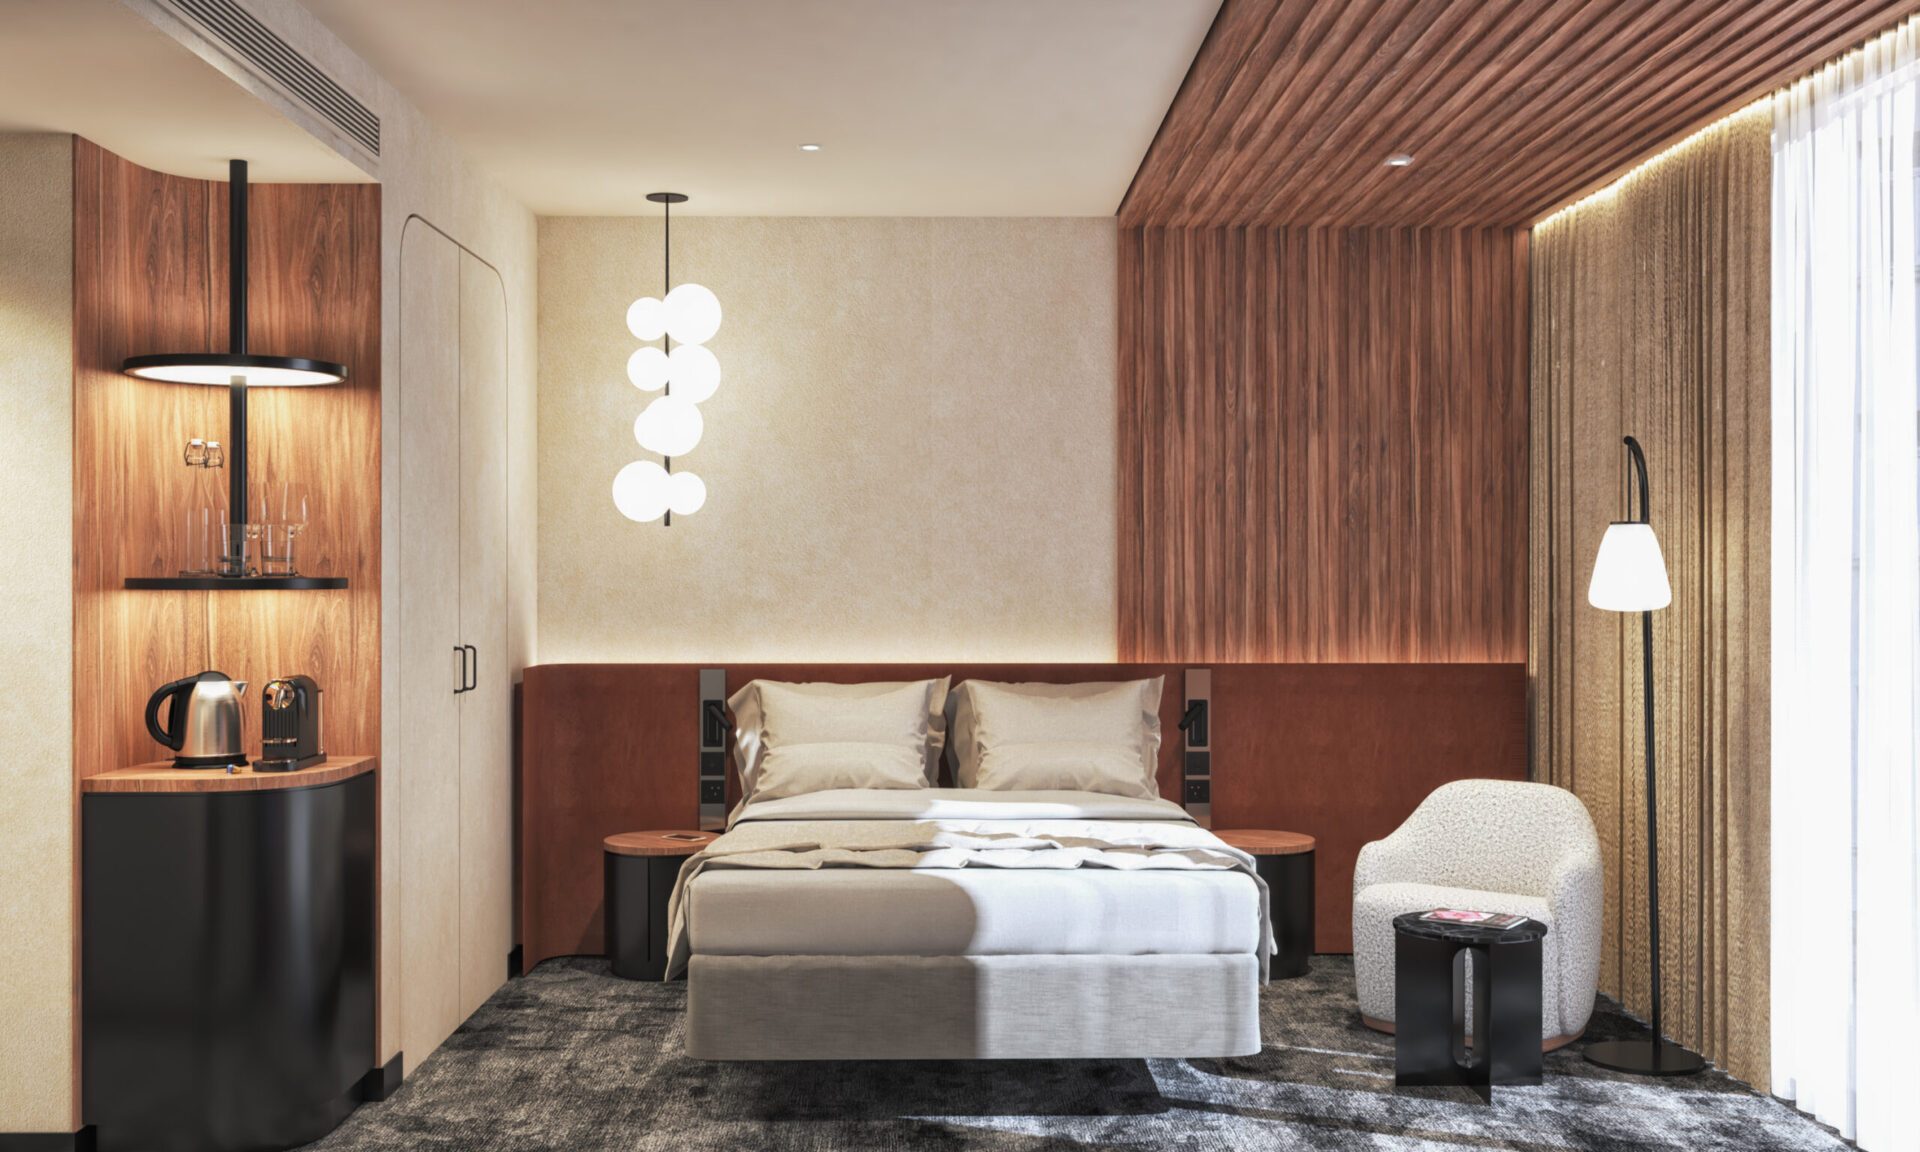 3D interior design model of Movenpick bedroom Accor, featuring Double Bed, wooden panels and modern hanging lights